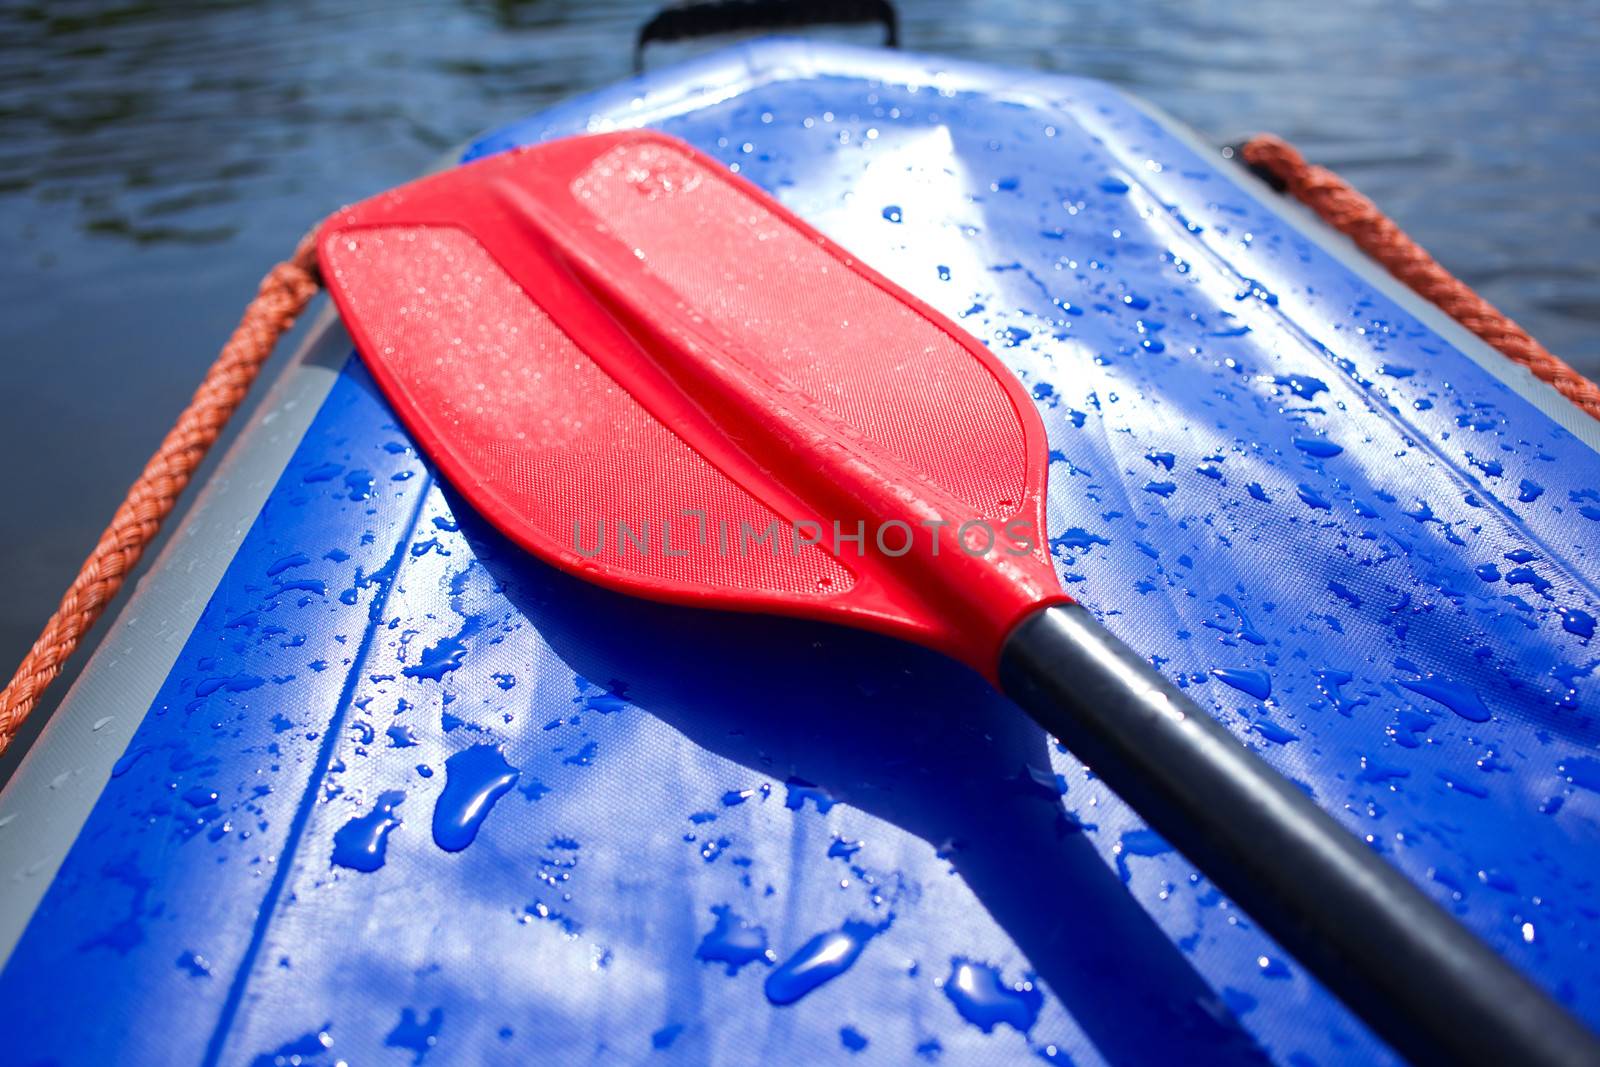 Red paddles for white water rafting and kayaking